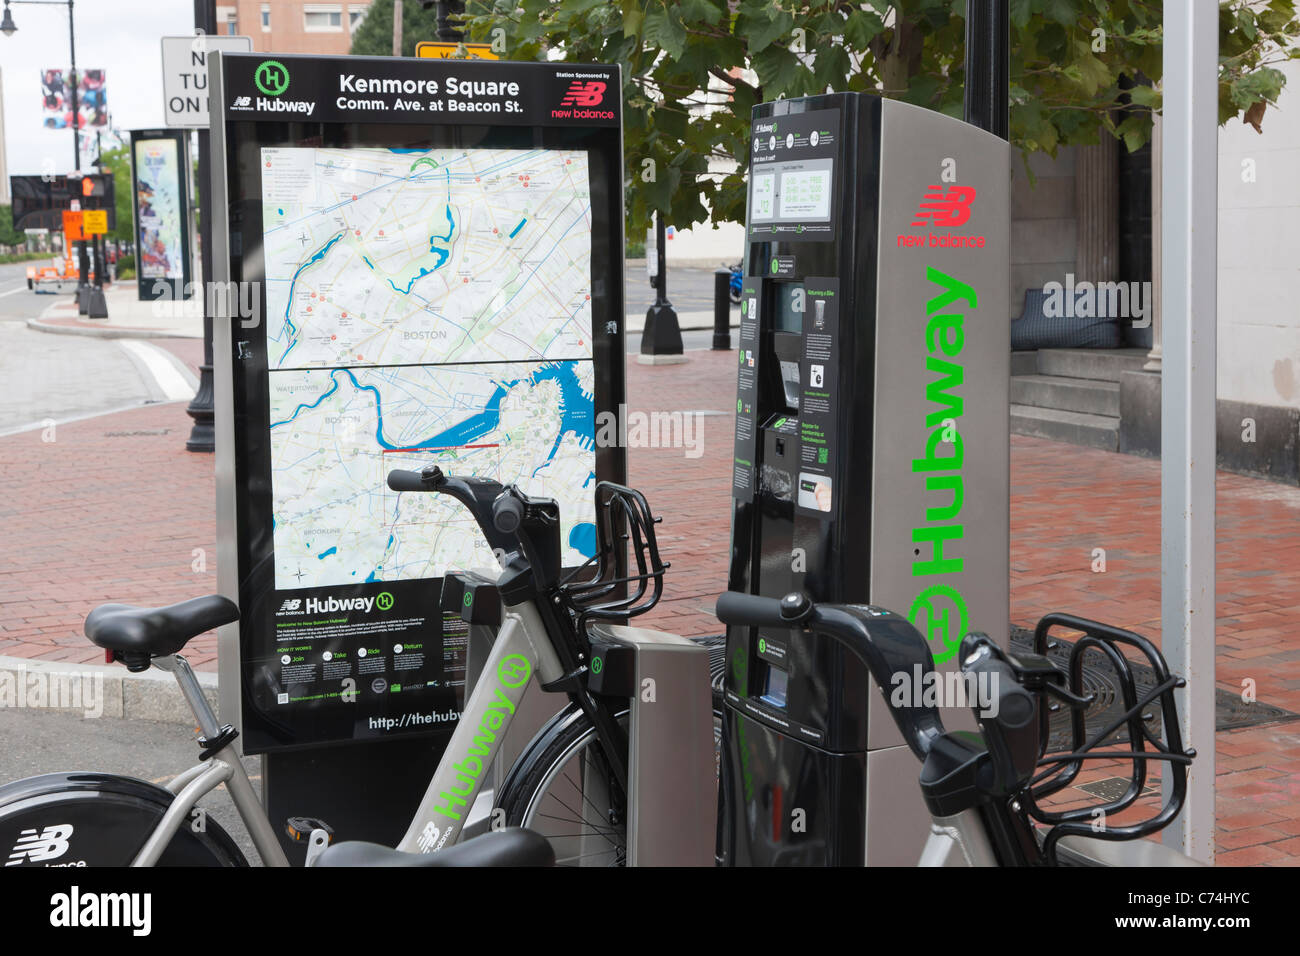 The Kenmore Square/Commonwealth Ave. station of the New Balance Hubway Bike Sharing system in Boston, Massachusetts. Stock Photo